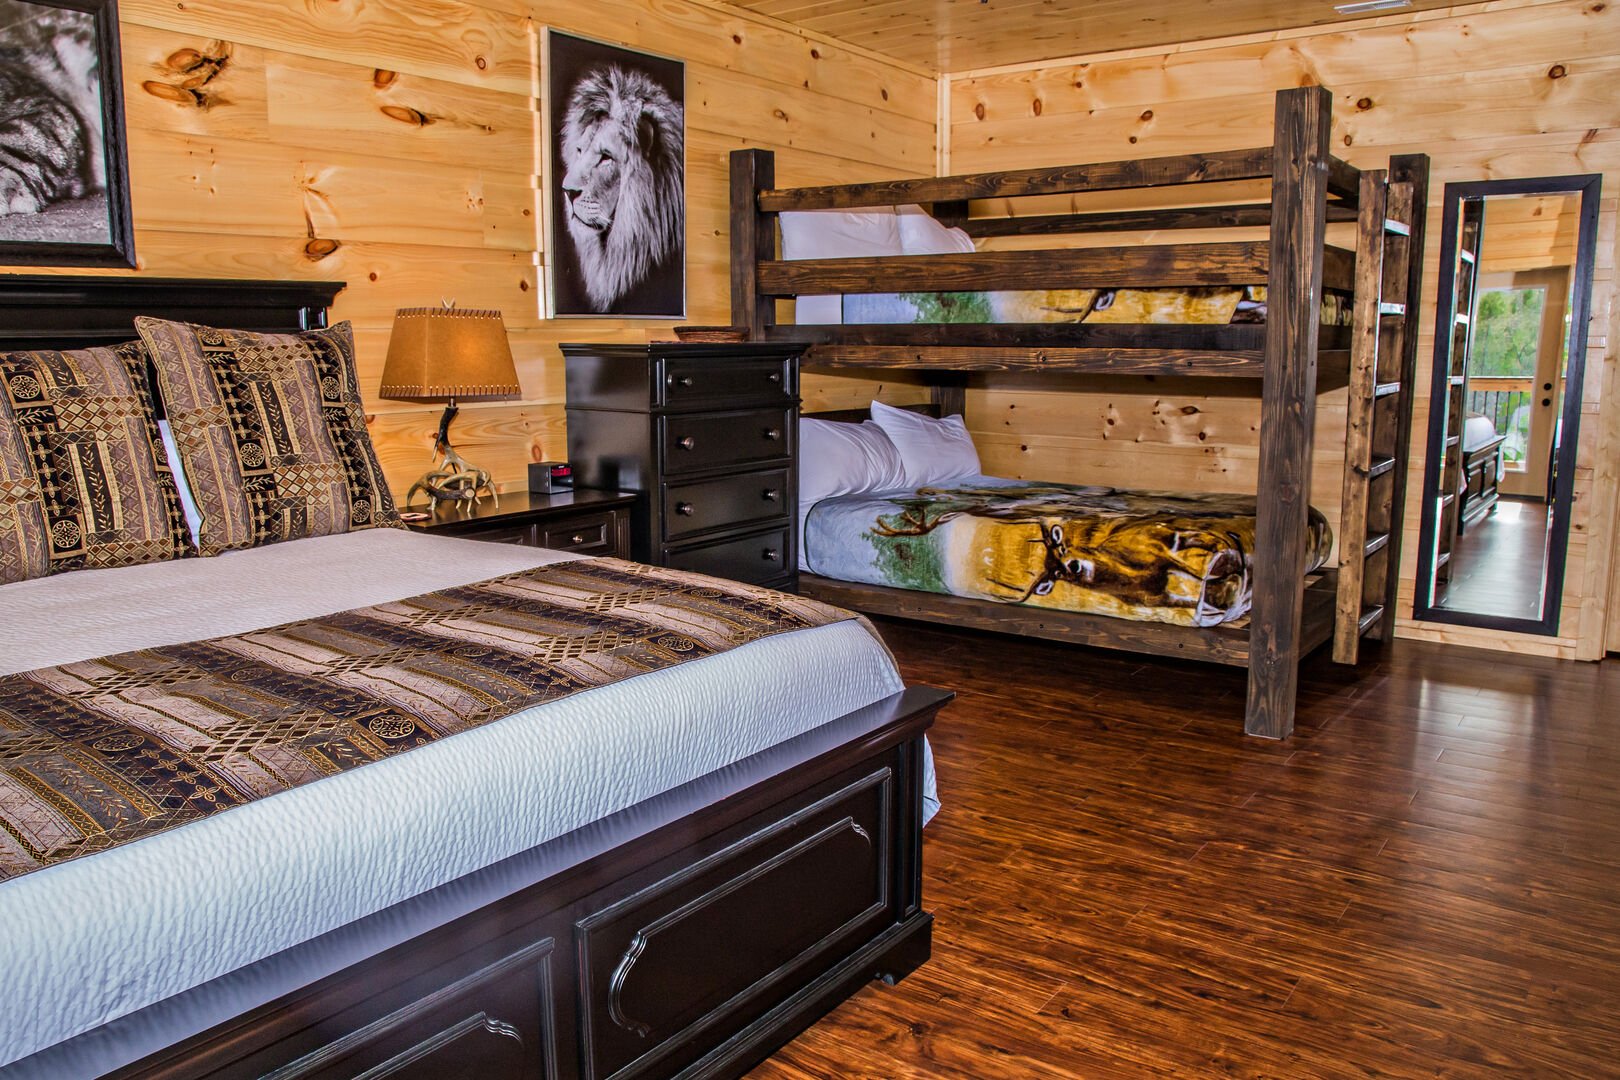 Bedroom Features a Wooden Bed and Bunk Bed.